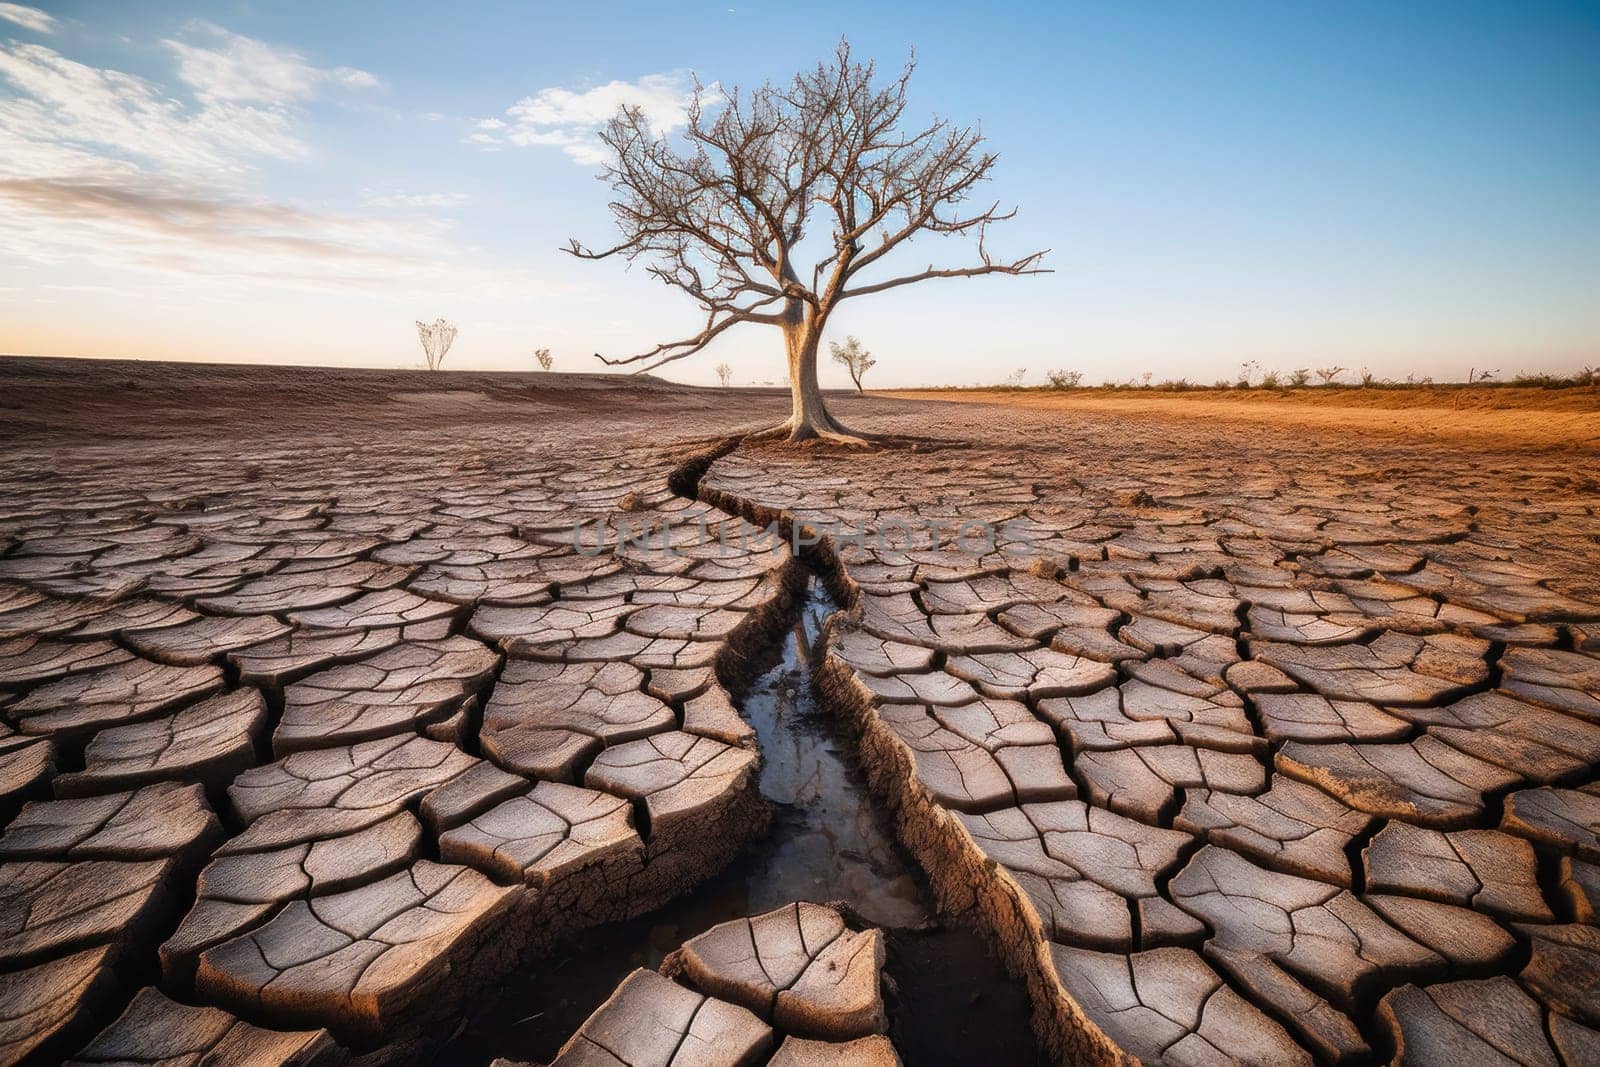 A single barren tree stands defiantly in a vast desert with deeply cracked soil, evoking themes of climate change and survival.